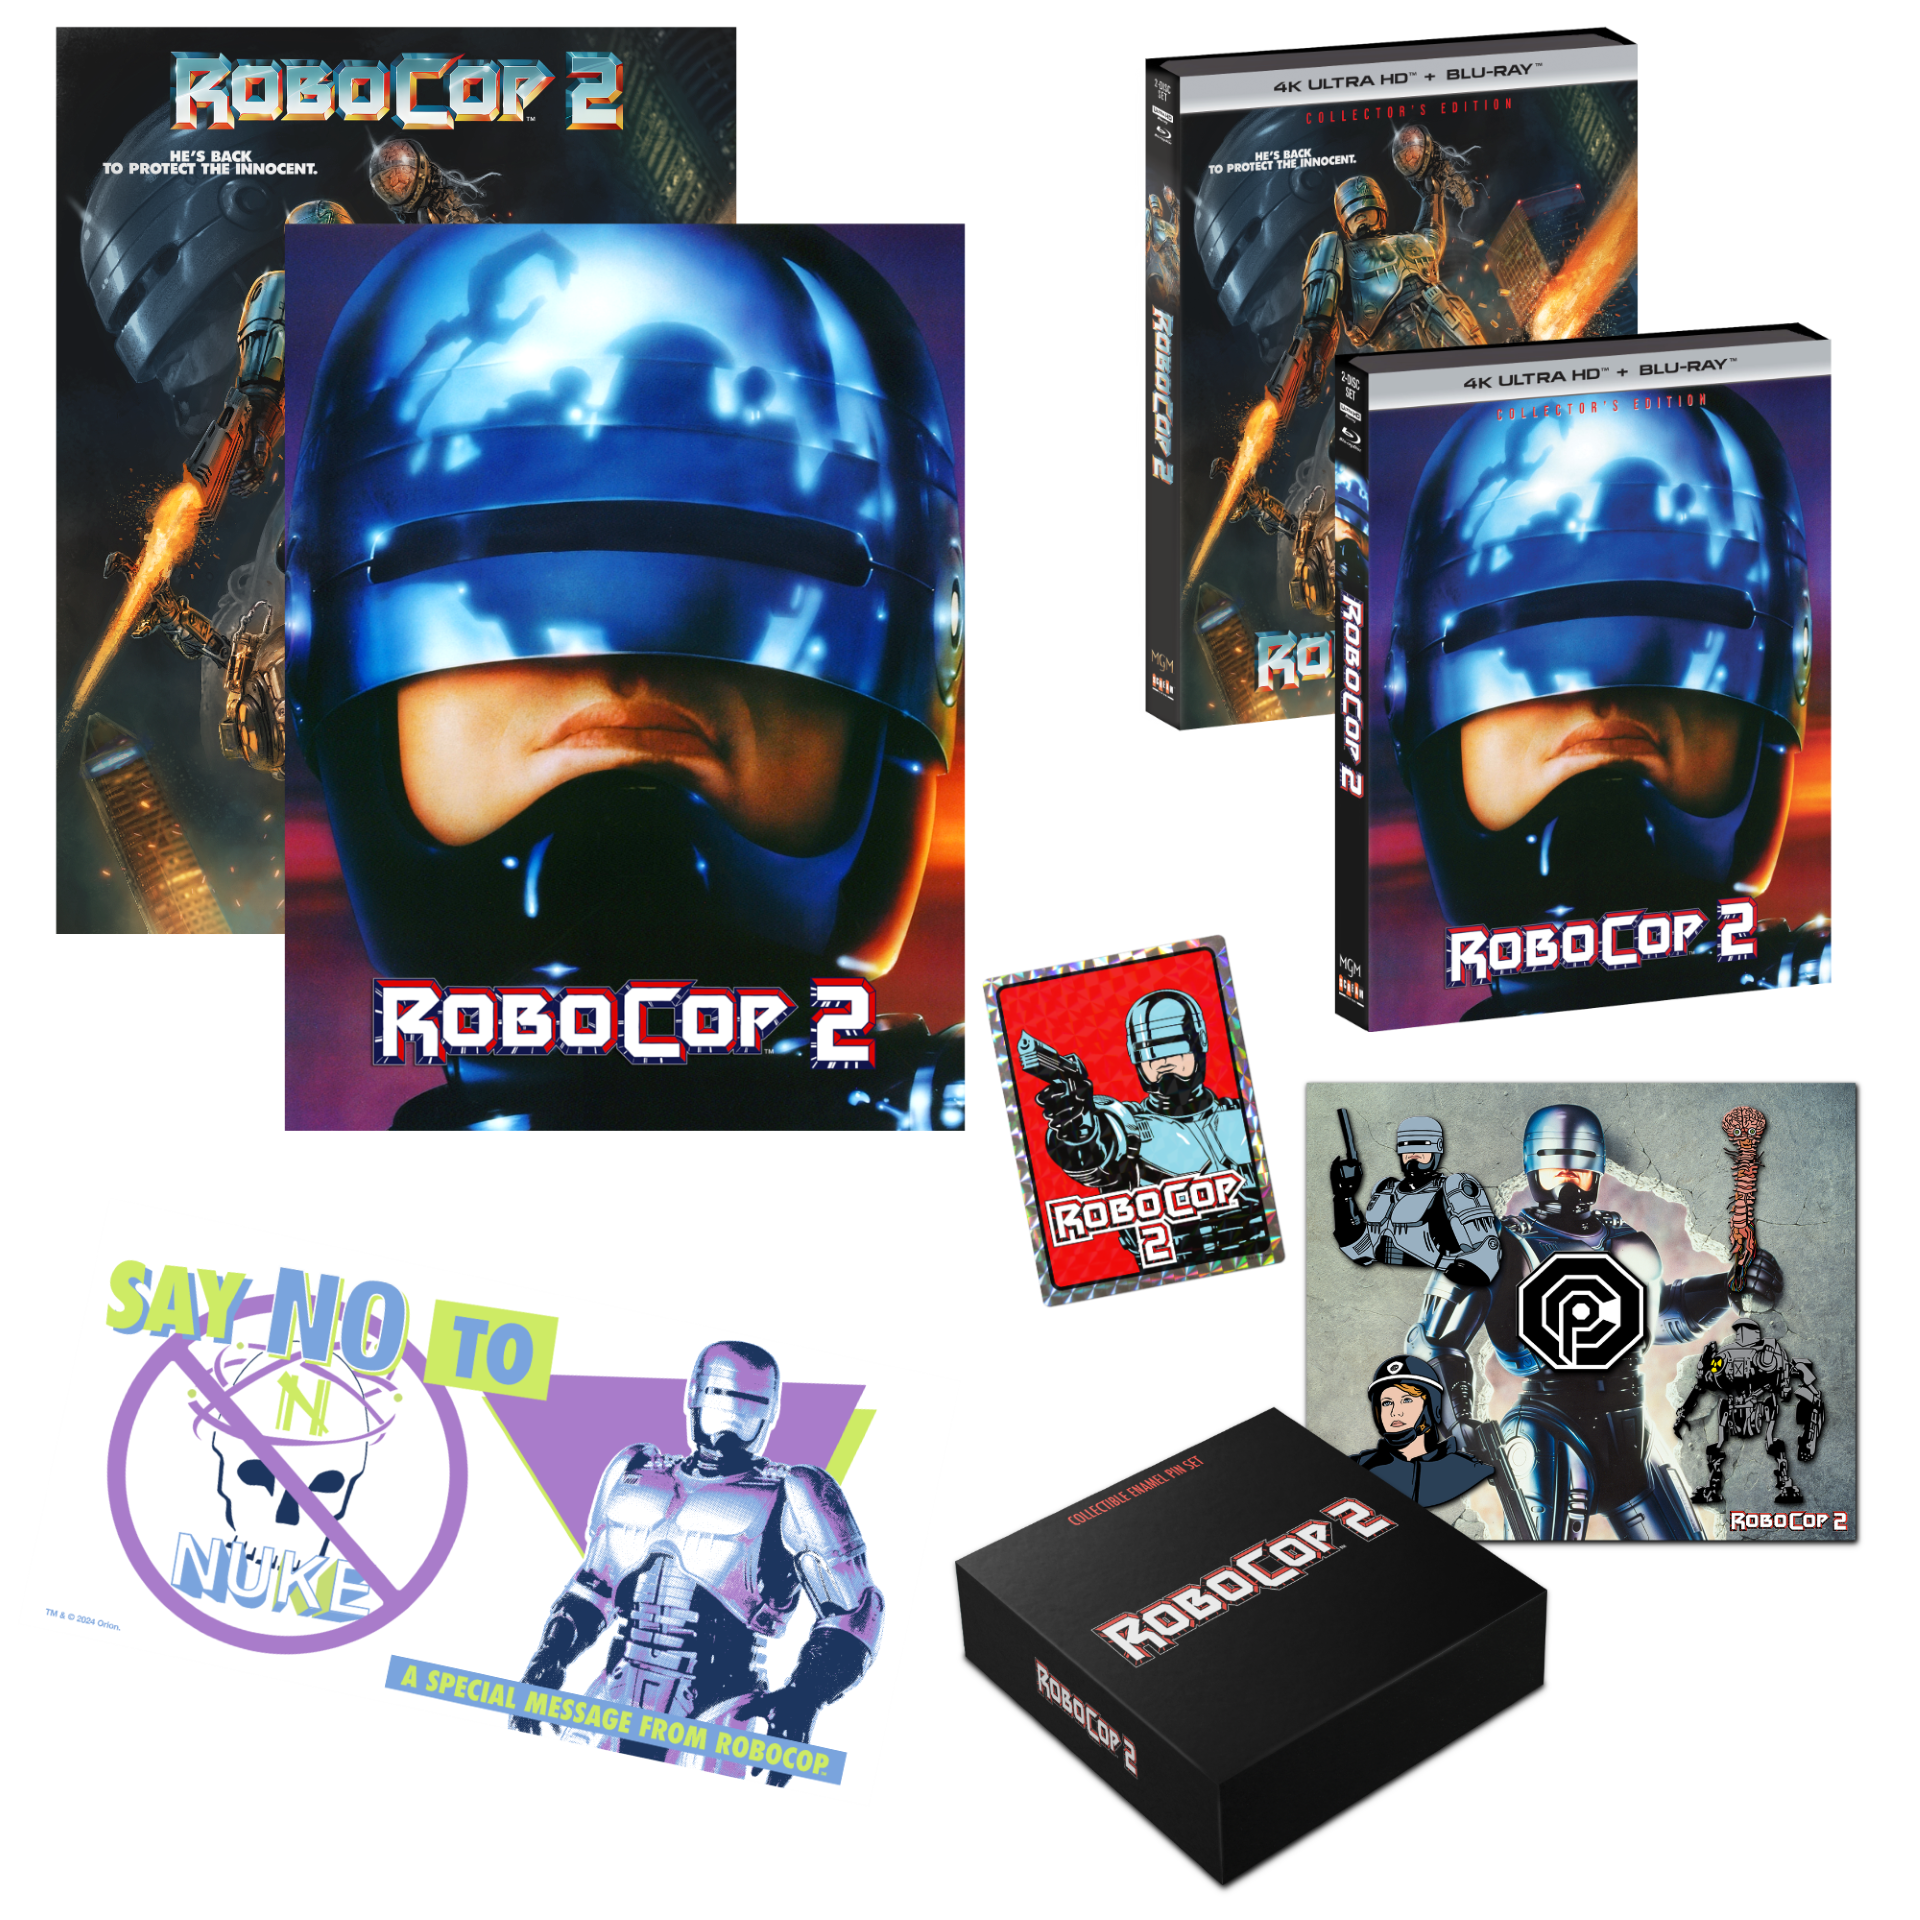 RoboCop 2 [Collector's Edition] + Exclusive Slipcover + 2 Exclusive Posters + Prism Sticker + Bumper Sticker + Lobby Cards + Enamel Pin Set - Shout! Factory